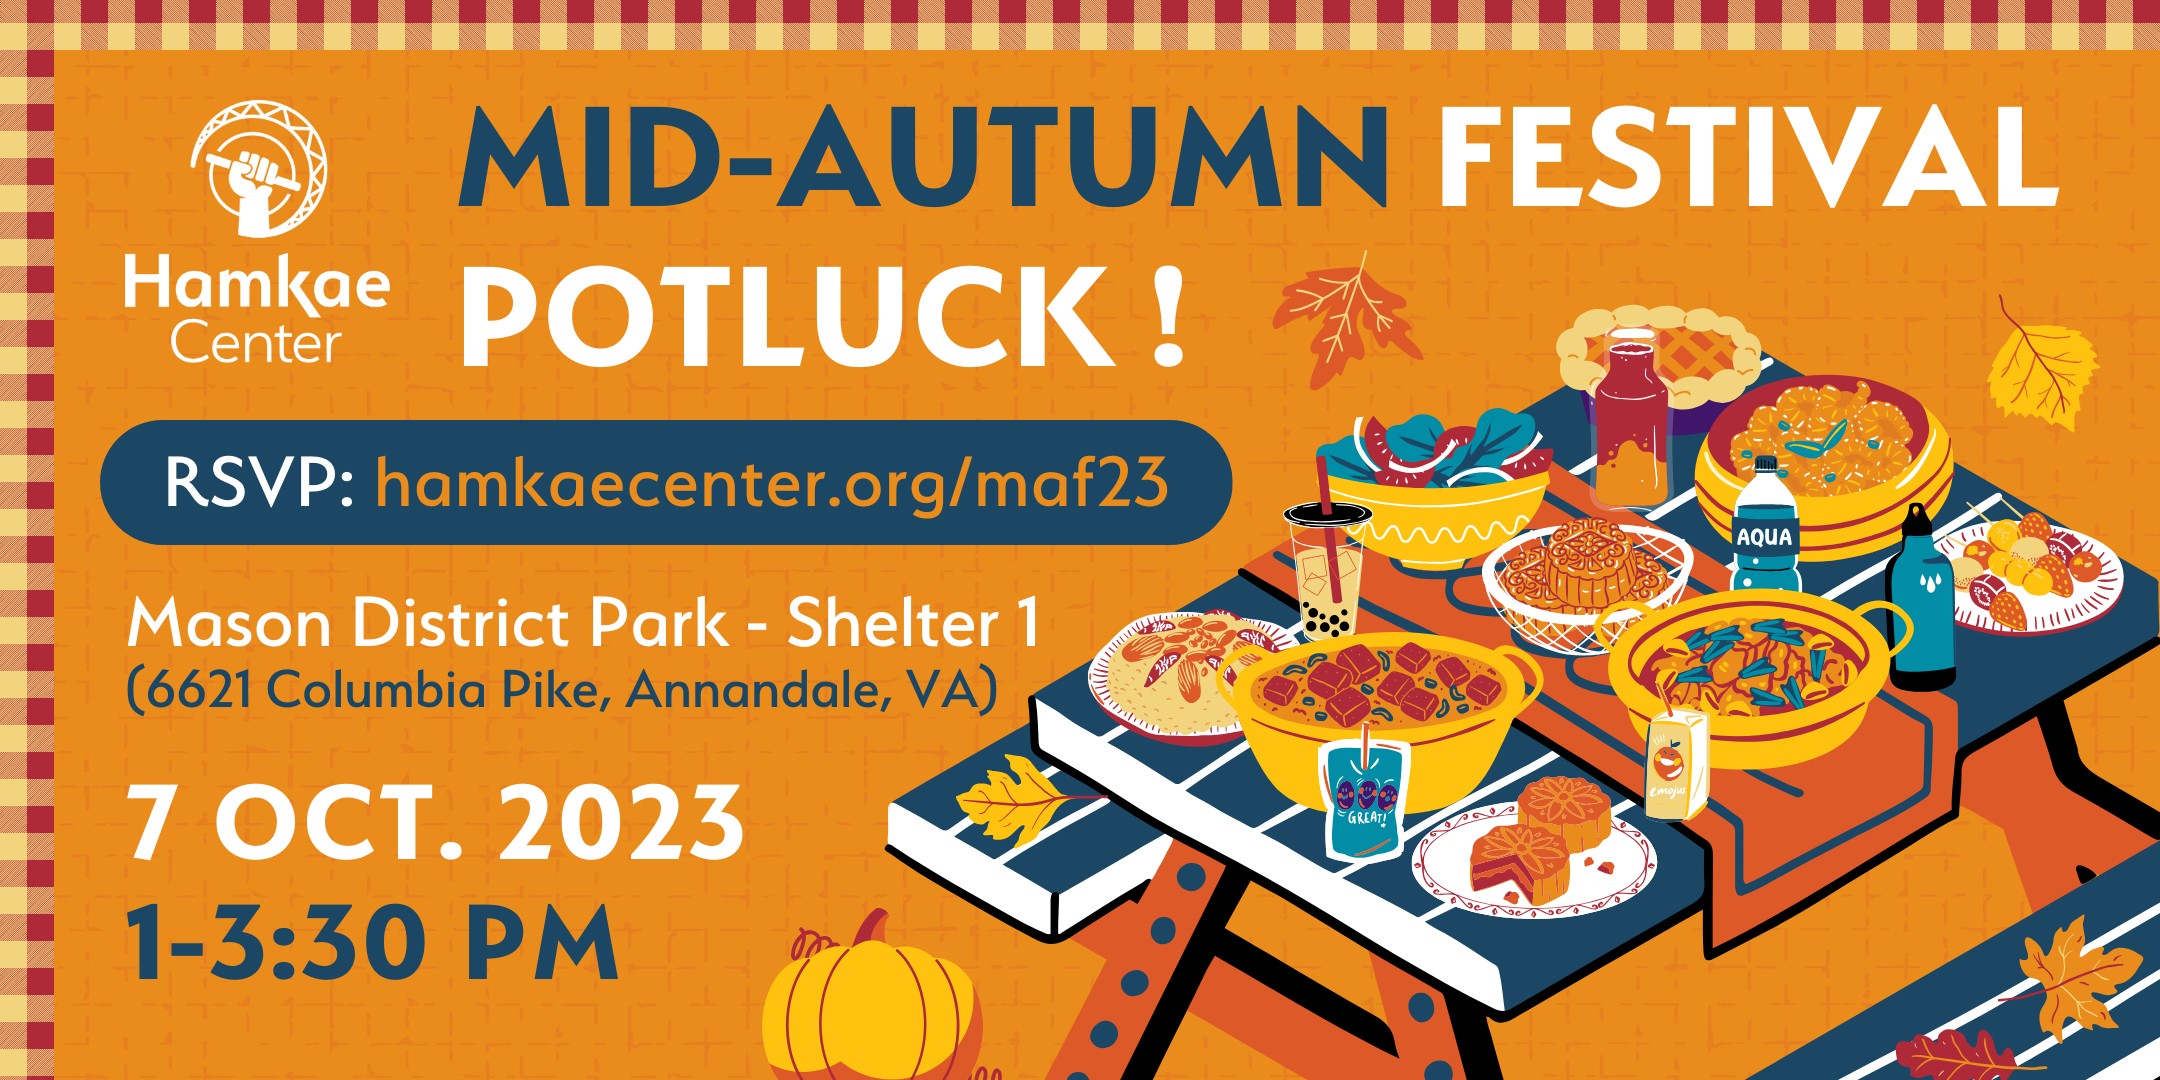 Hamkae Center's Mid-Autumn Festival Potluck! Mason District Park - Shelter 1 (6621 Columbia Pike, Annandale, VA) 1-3:30pm; 7 Oct. 2023 RSVP: hamkaecenter.org/maf23 Graphic of a picnic table covered with pots and dishes full of food, and some beverages. Around the table are fallen autumn leaves and a pumpkin.